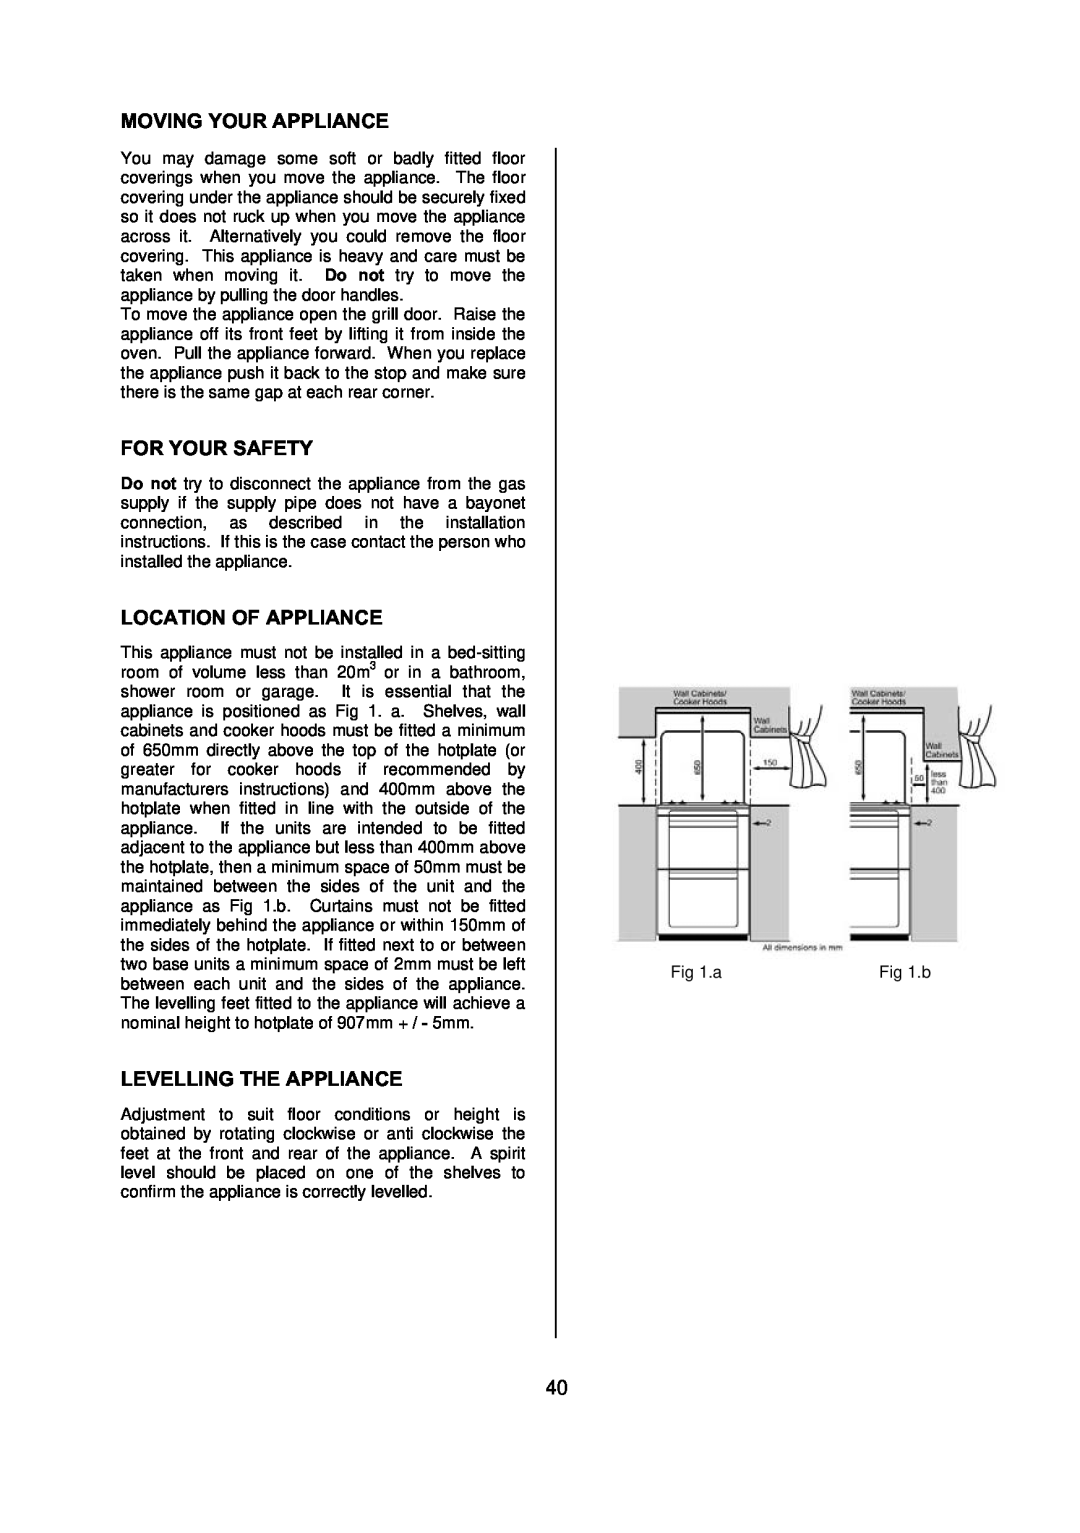 Electrolux D77000 user manual Moving Your Appliance, For Your Safety, Location Of Appliance, Levelling The Appliance 